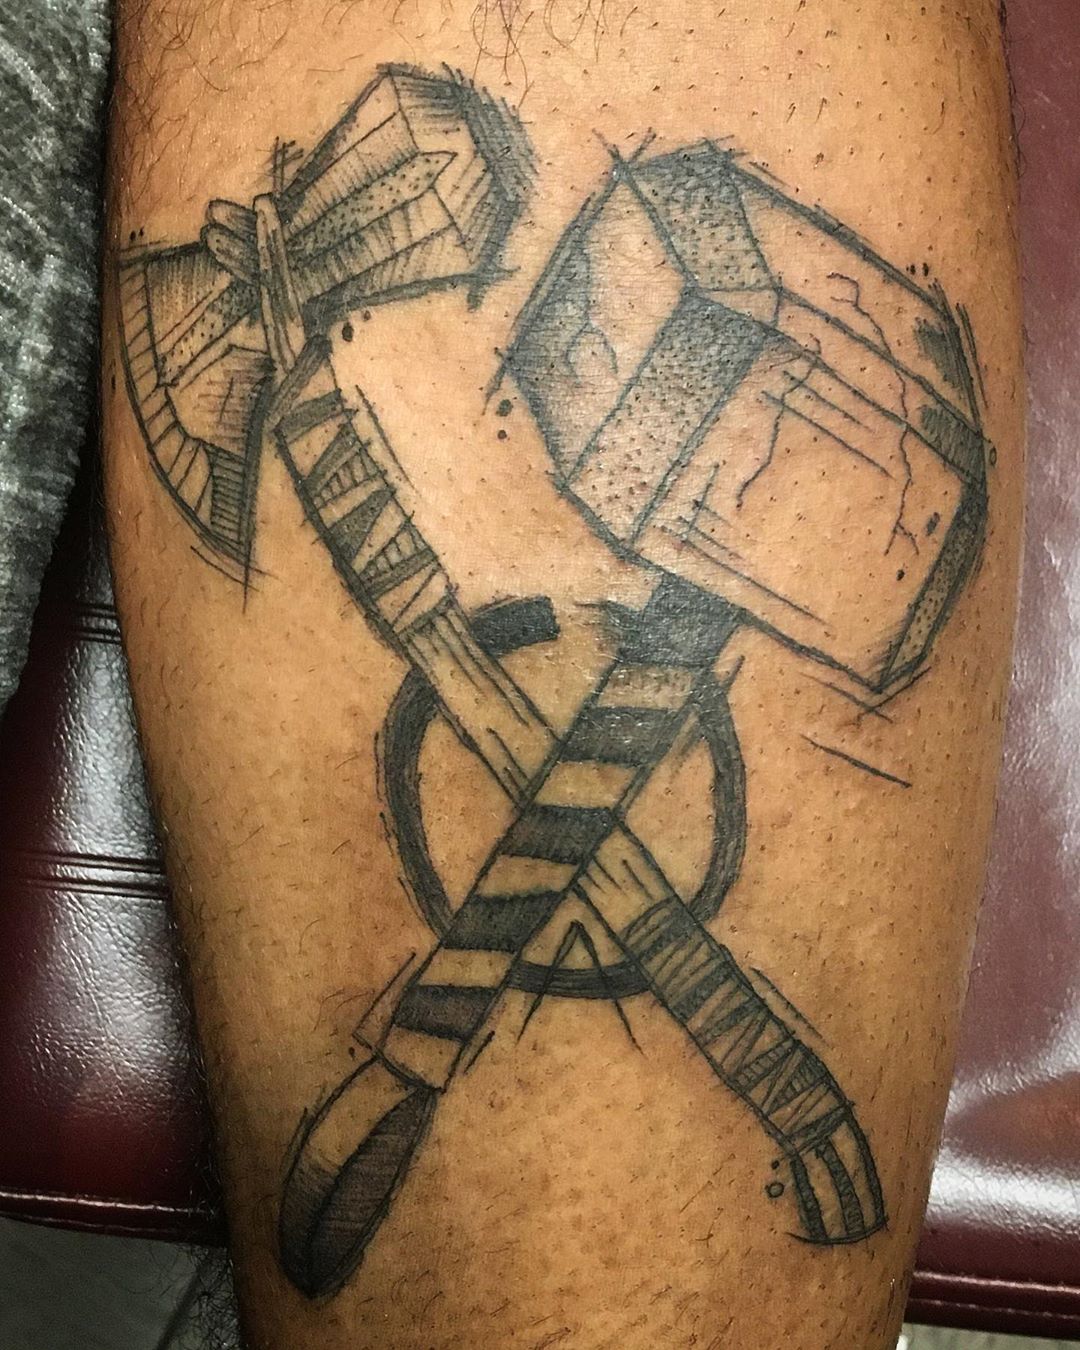 Thor's Hammer Tattoo now by flames-within-me on DeviantArt